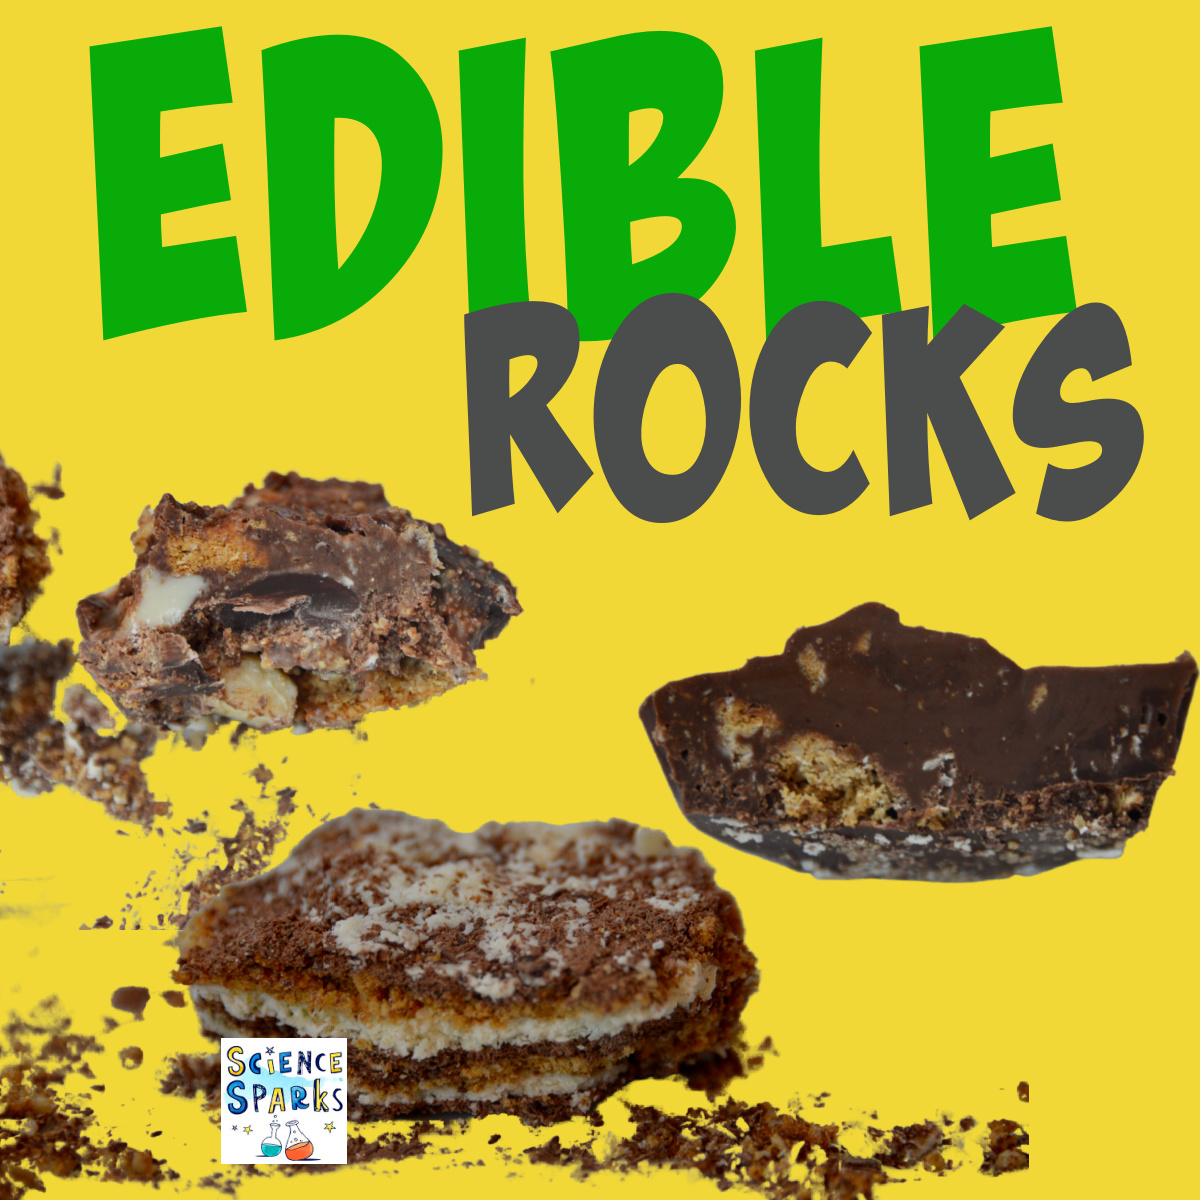 How to make edible rocks {A Step-by-step Science Activity}